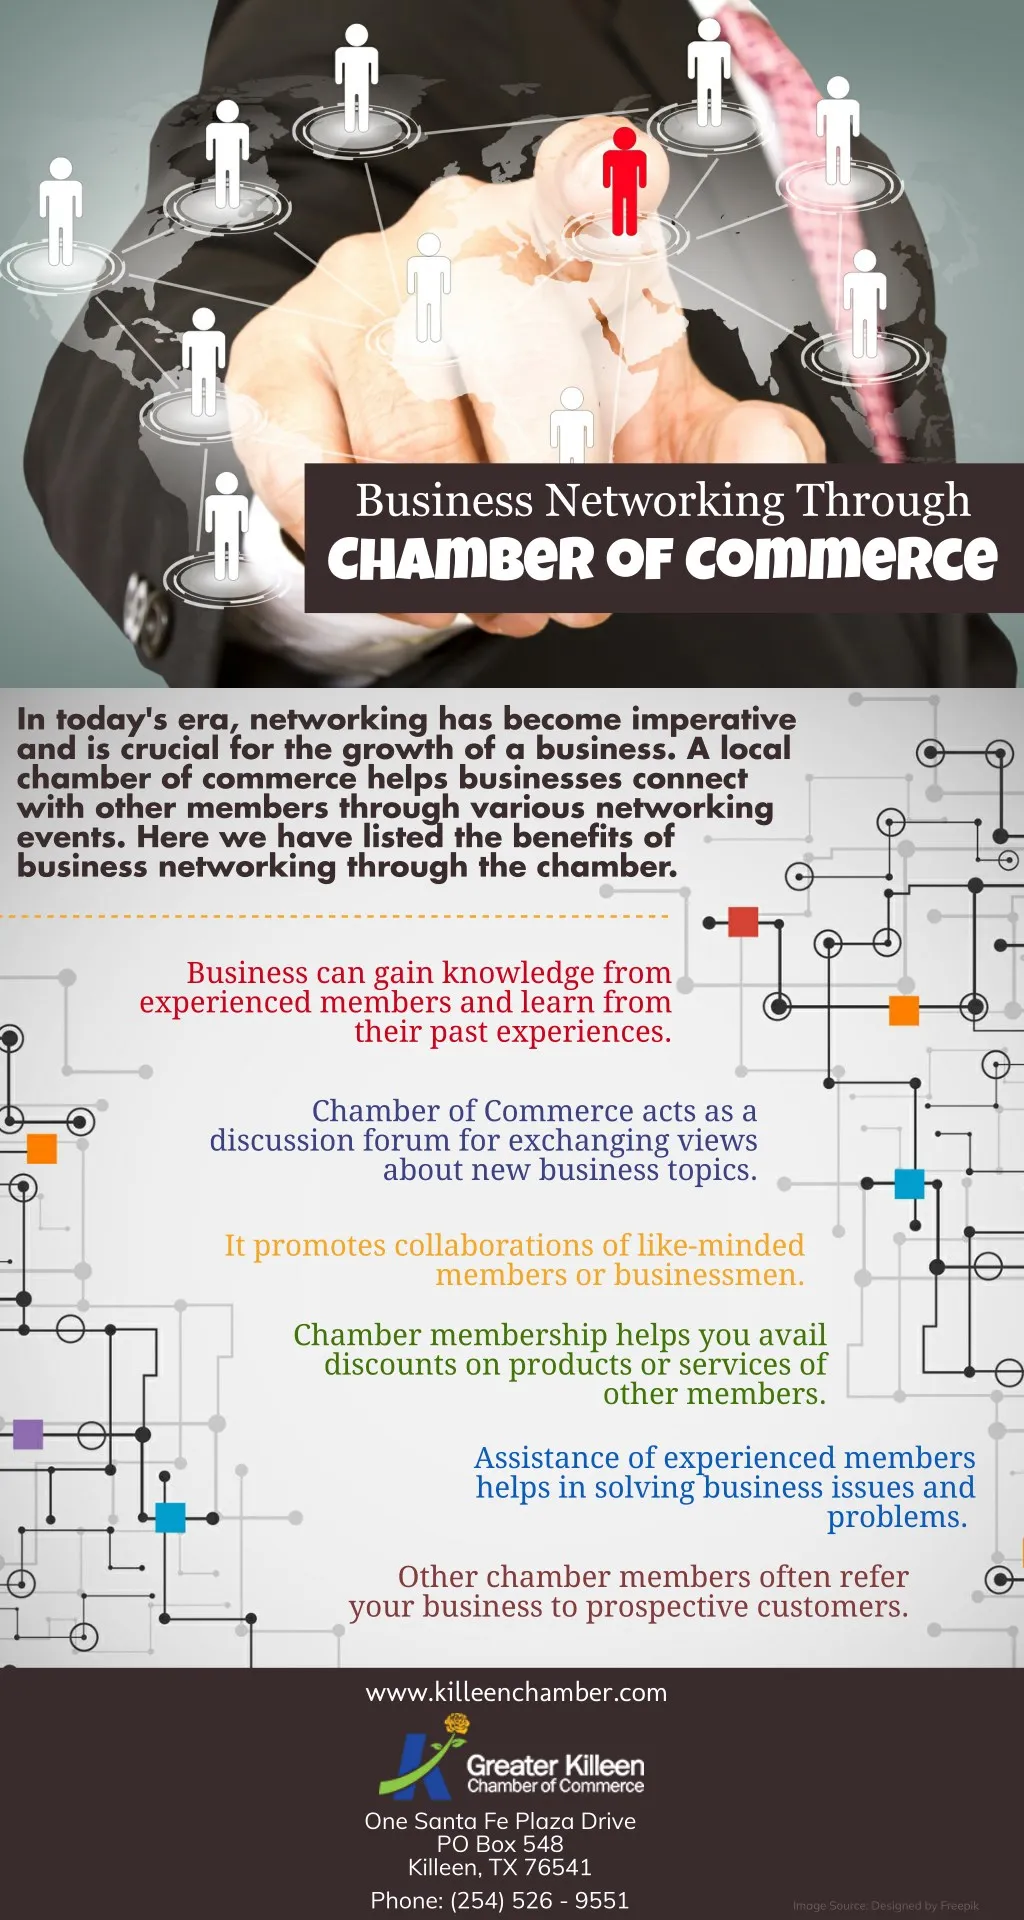 business networking through chamber of commerce